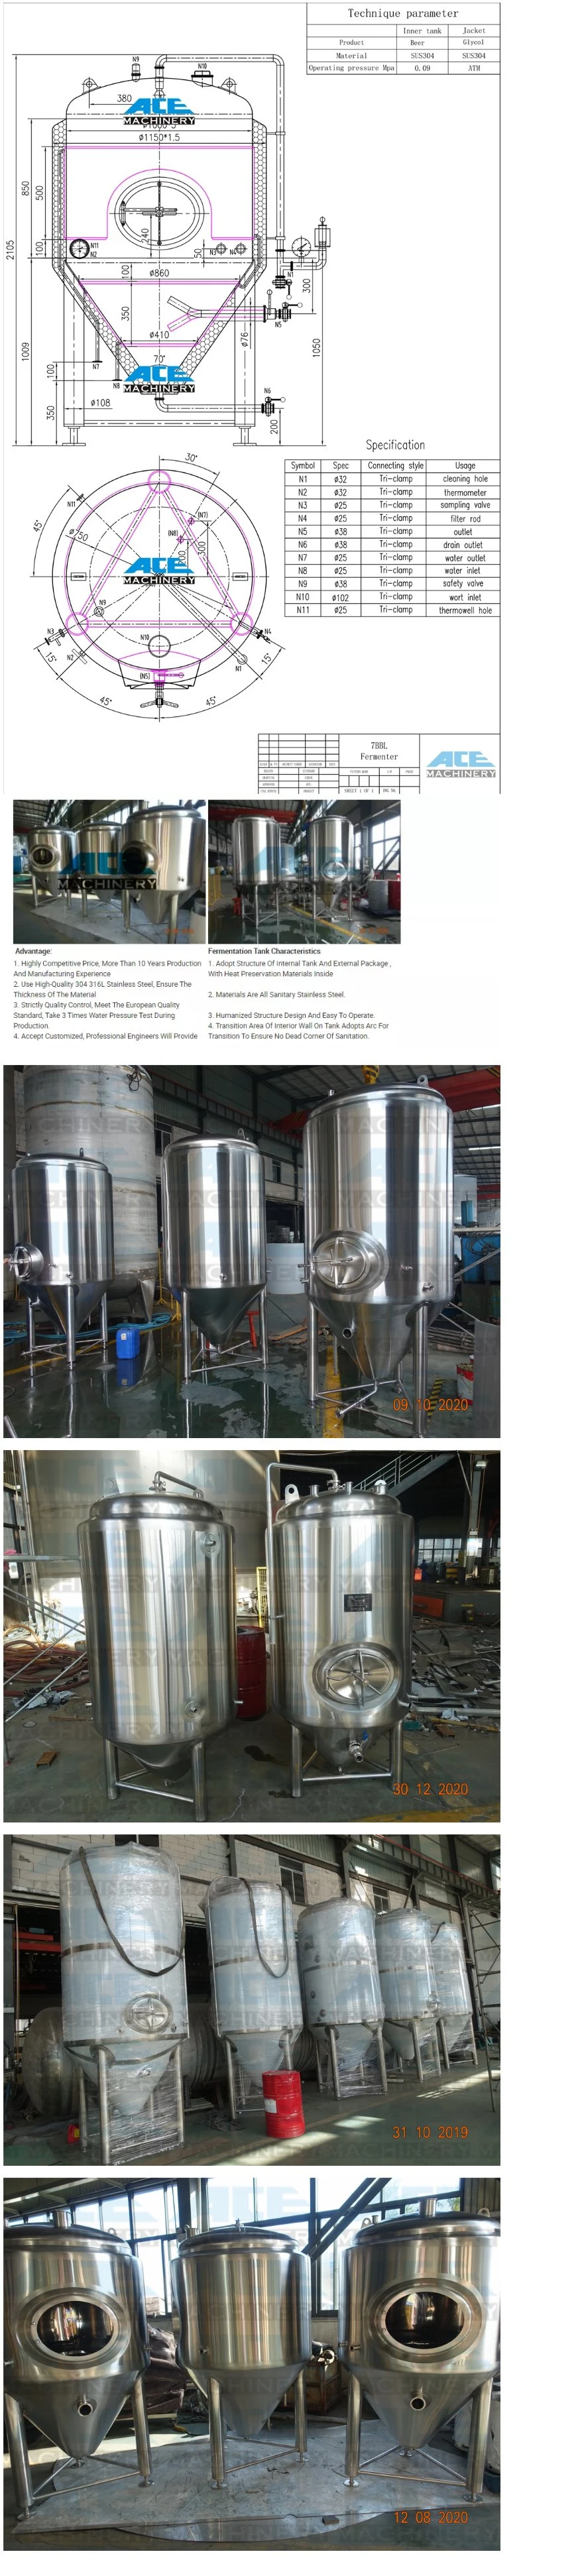 Professional Fermenting Equipment with Conical Fermentation Tank in Beer Fermenter Fermentation Kettle